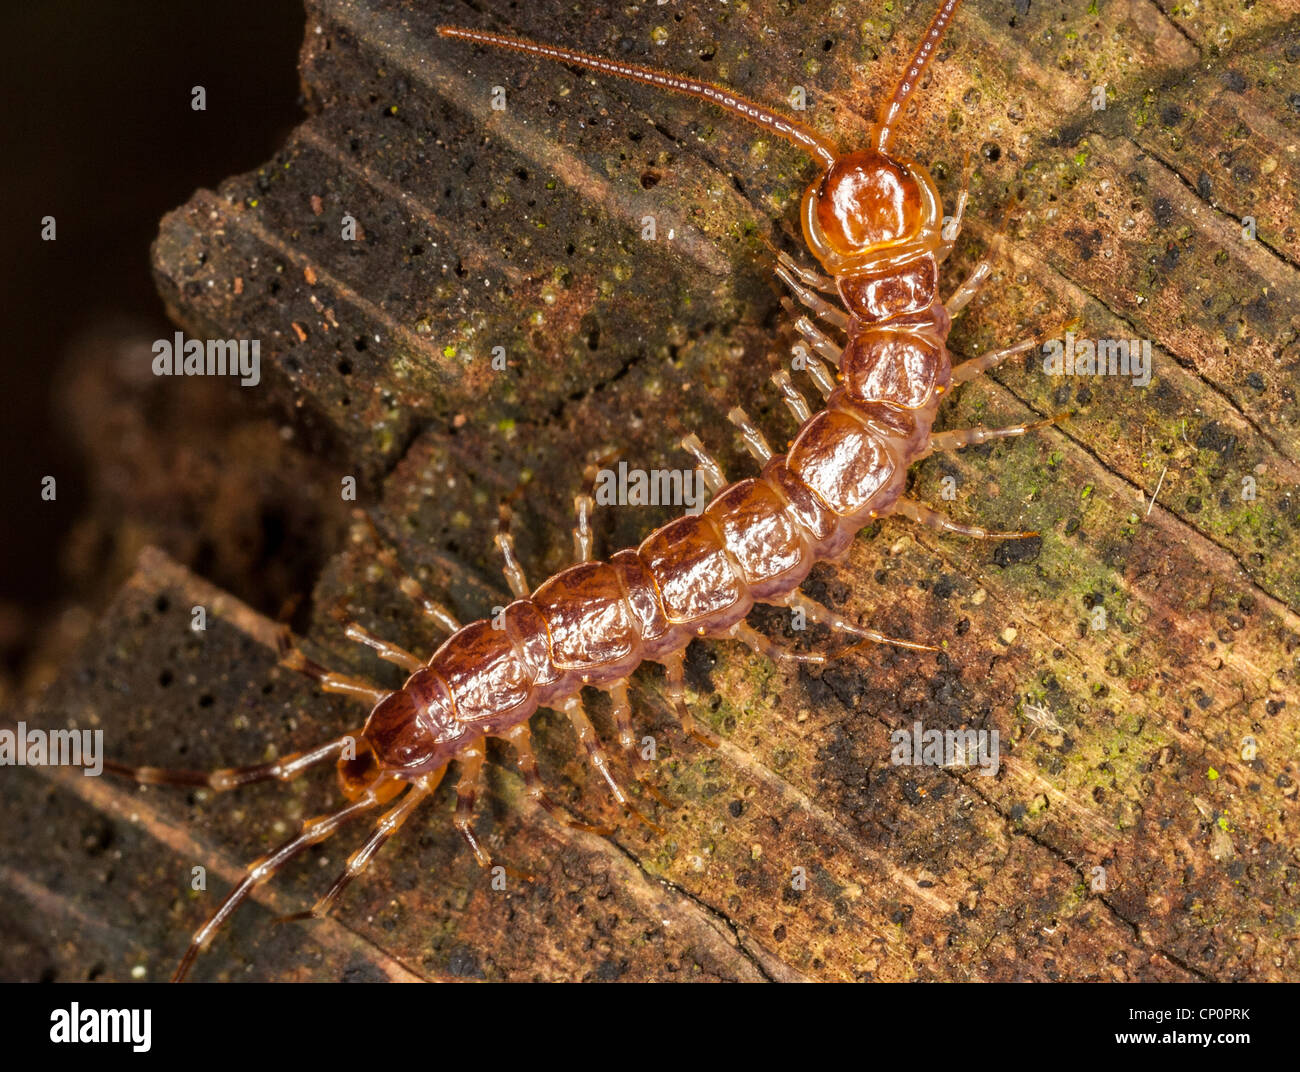 Centipede, probably Lithopius variegatus the banded centipede, distinguished from L. forficatus by its banded legs Stock Photo